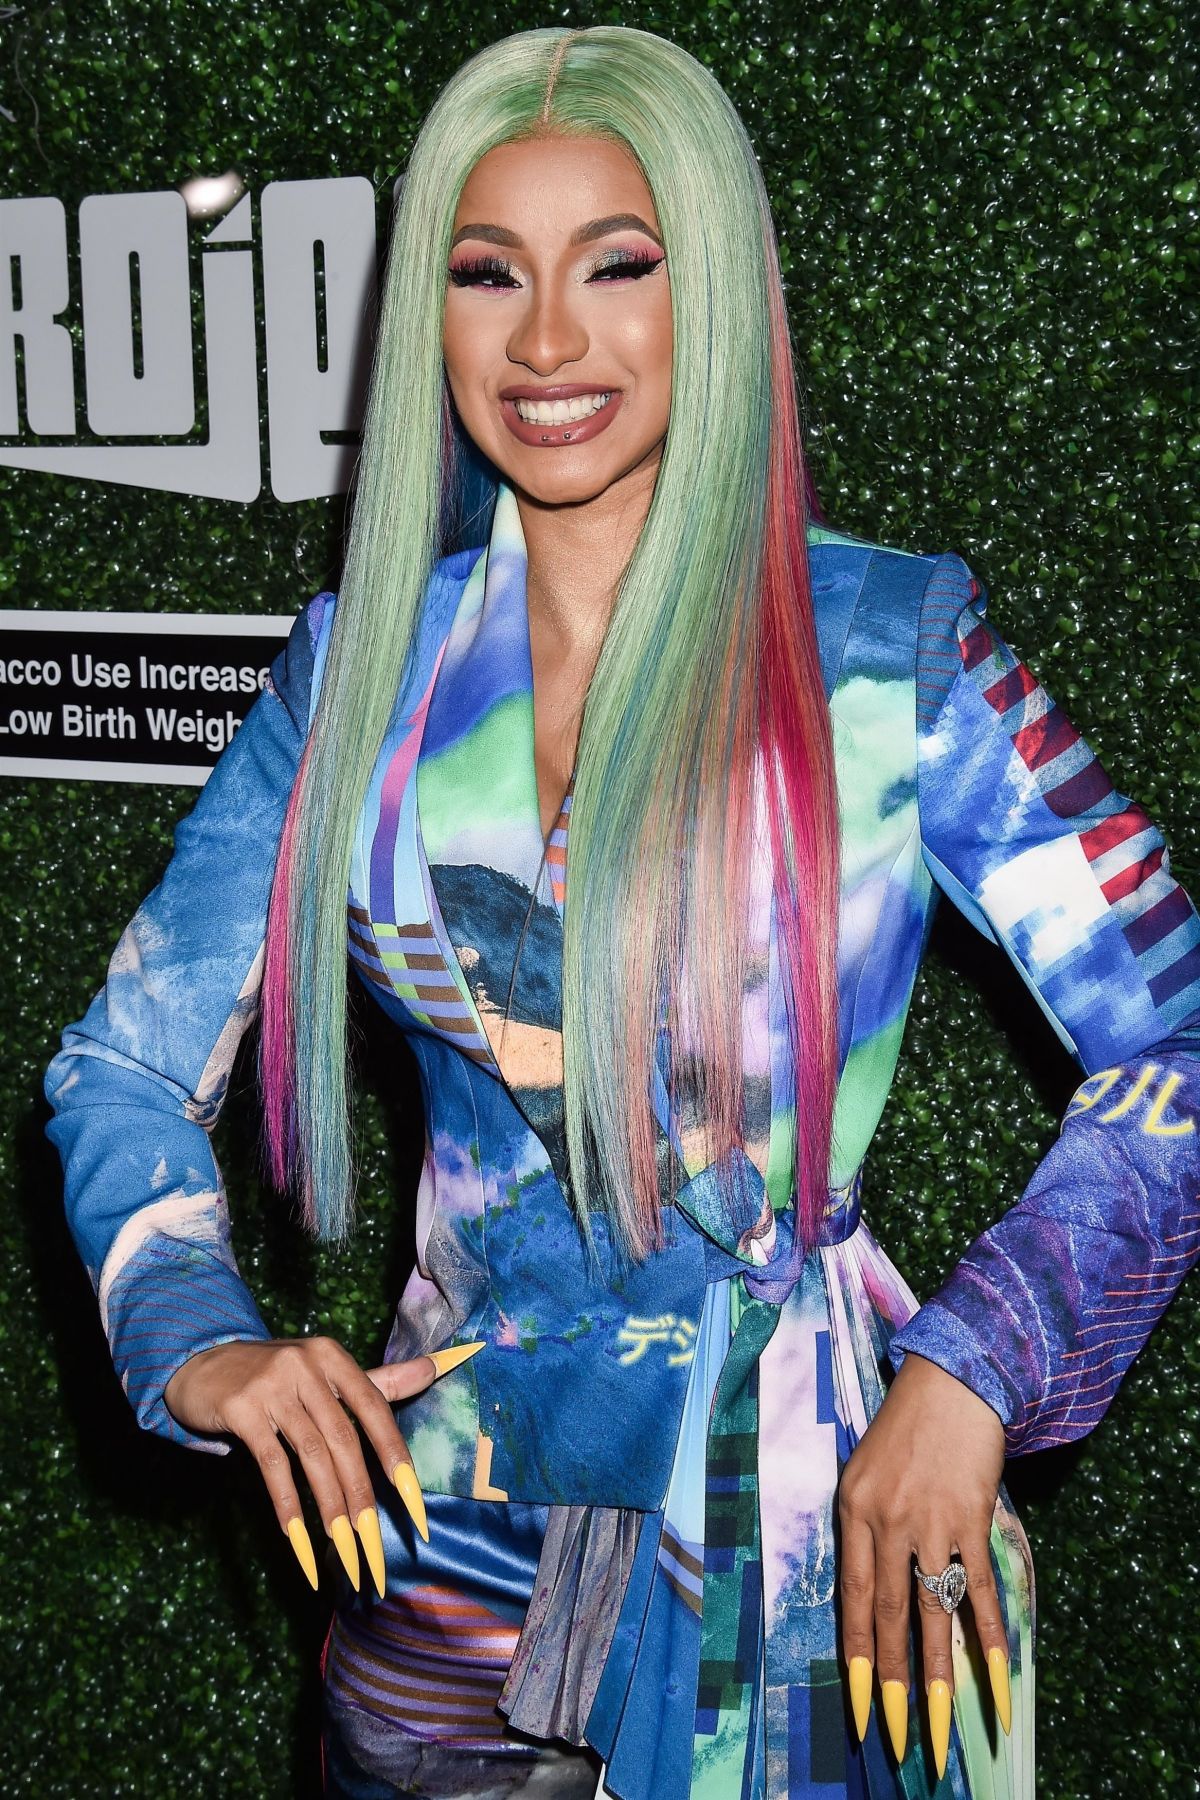 cardi-b-at-swisher-sweets-awards-in-west-hollywood-04-12-2019-2.jpg